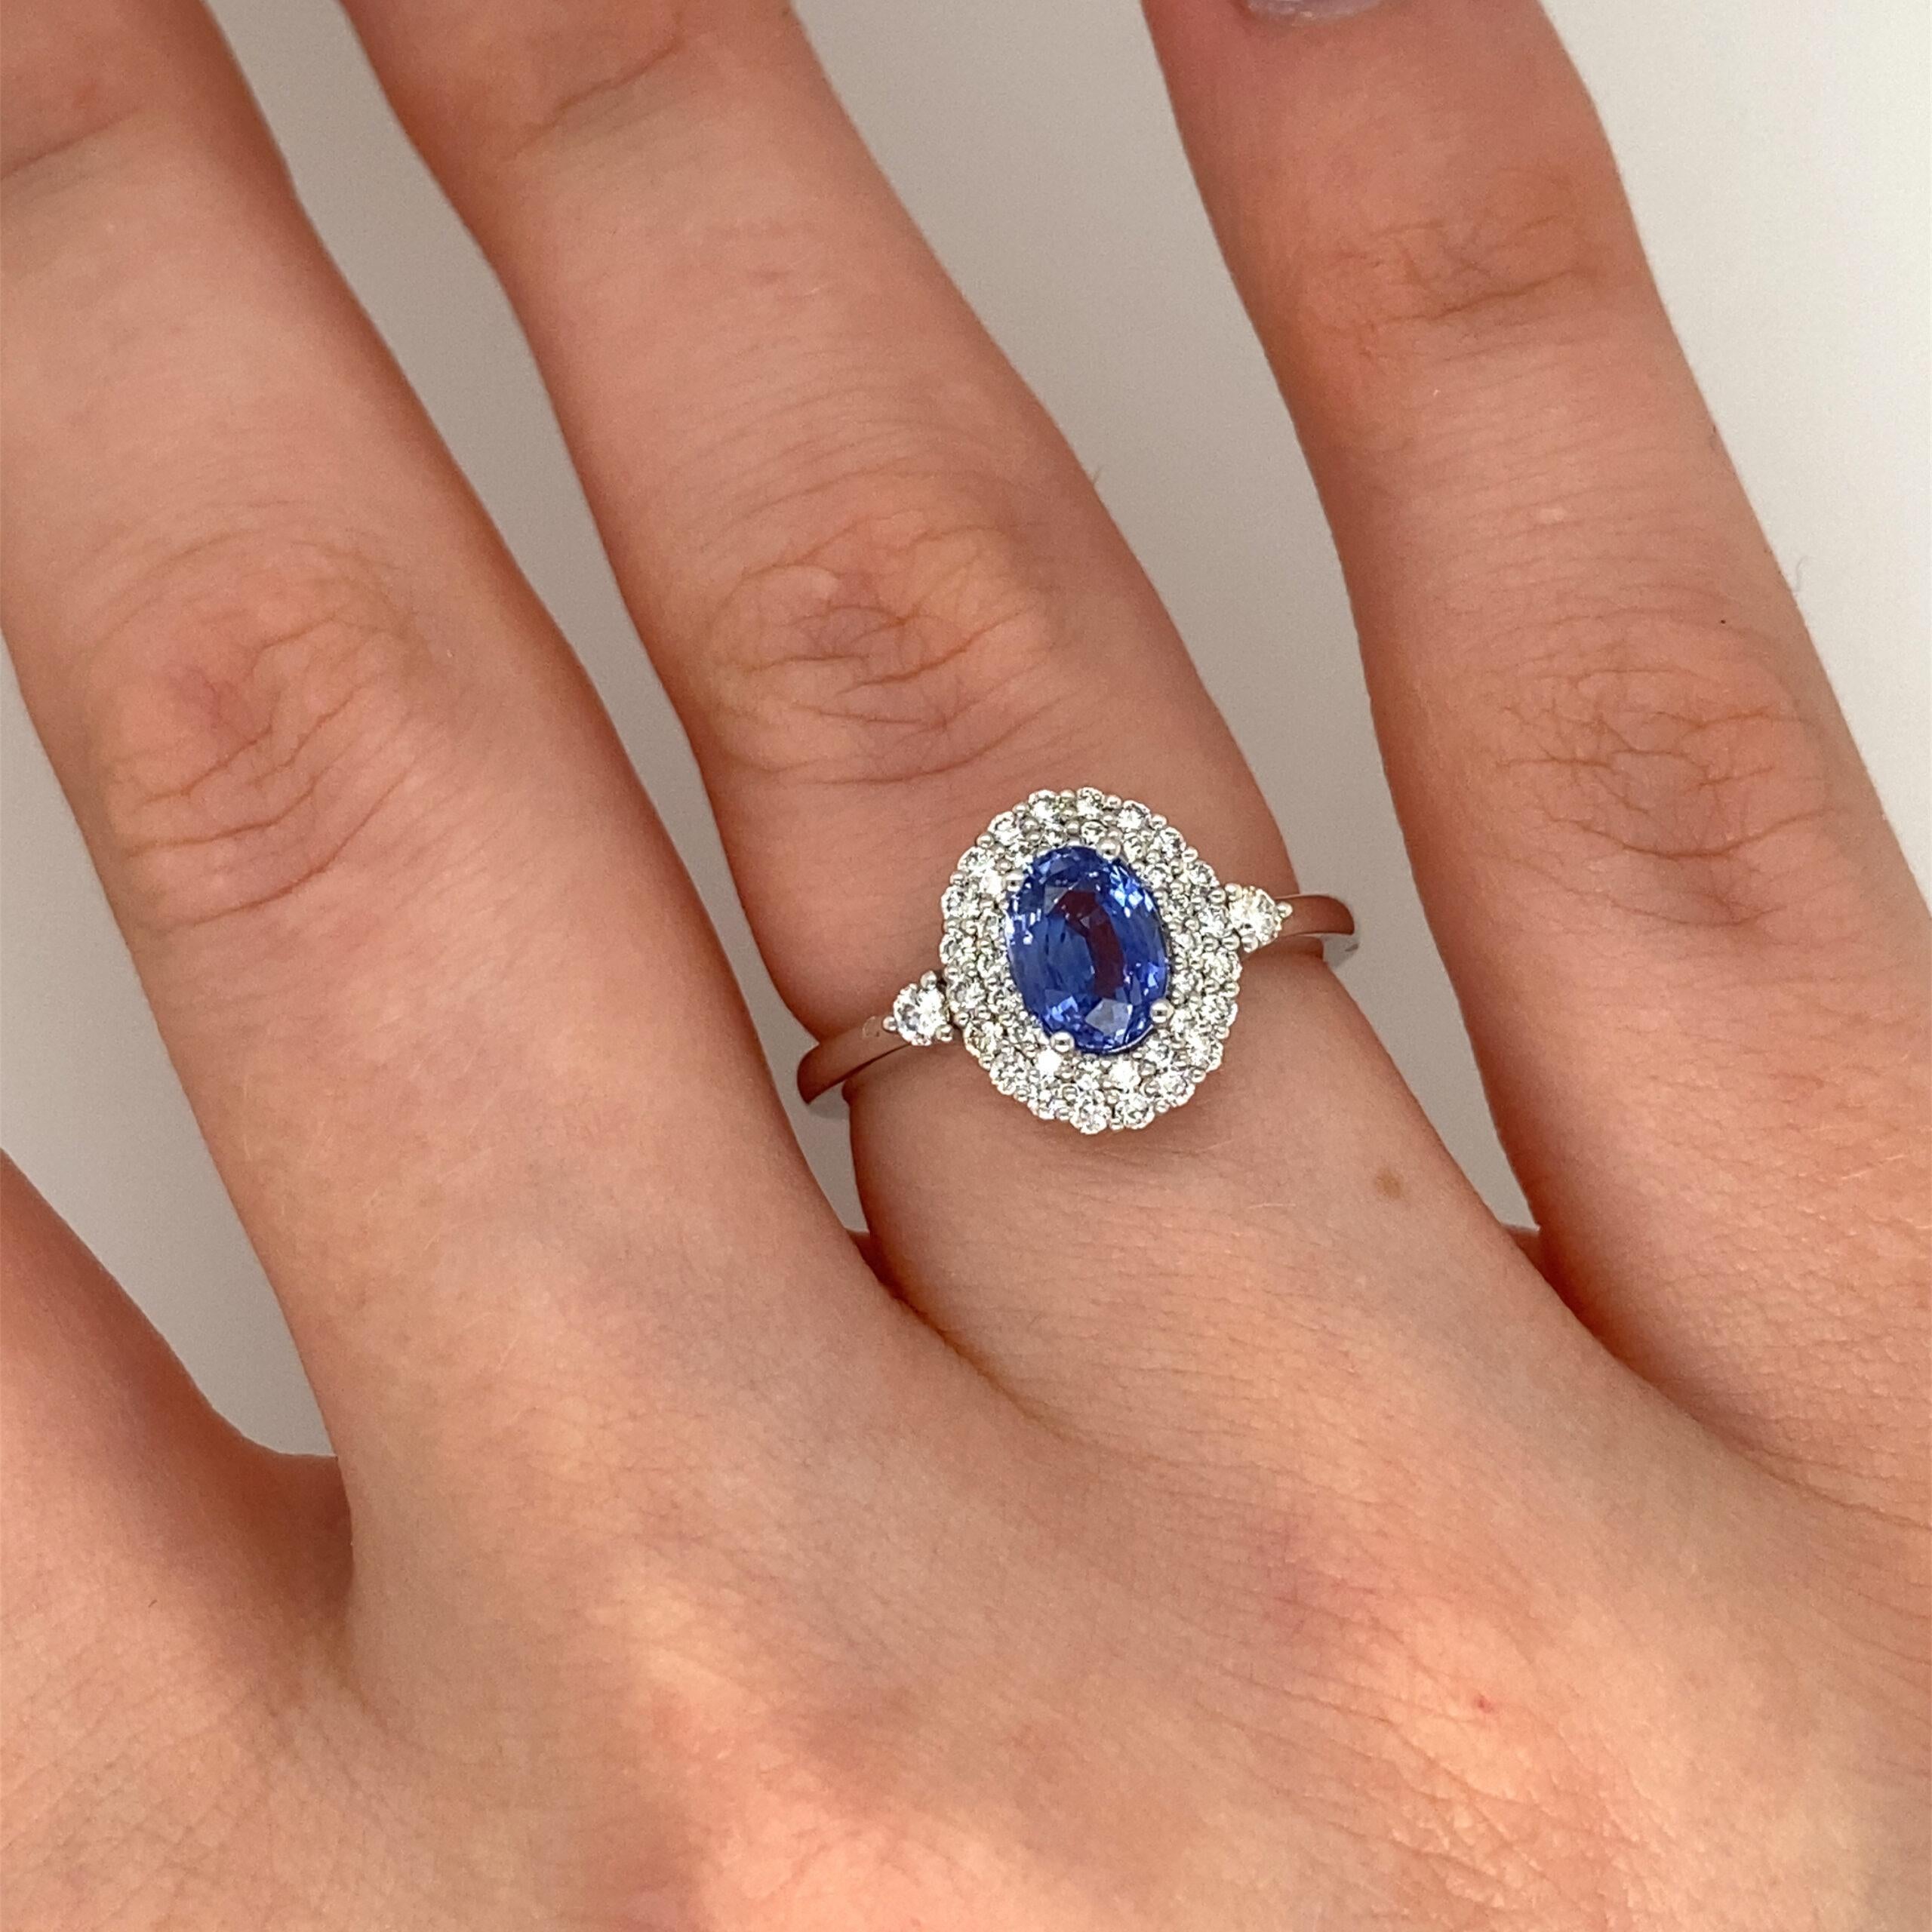 Women's 1.03ct Certified Natural Ceylon Sapphire Ring Surrounded by 0.31ct Diamonds For Sale